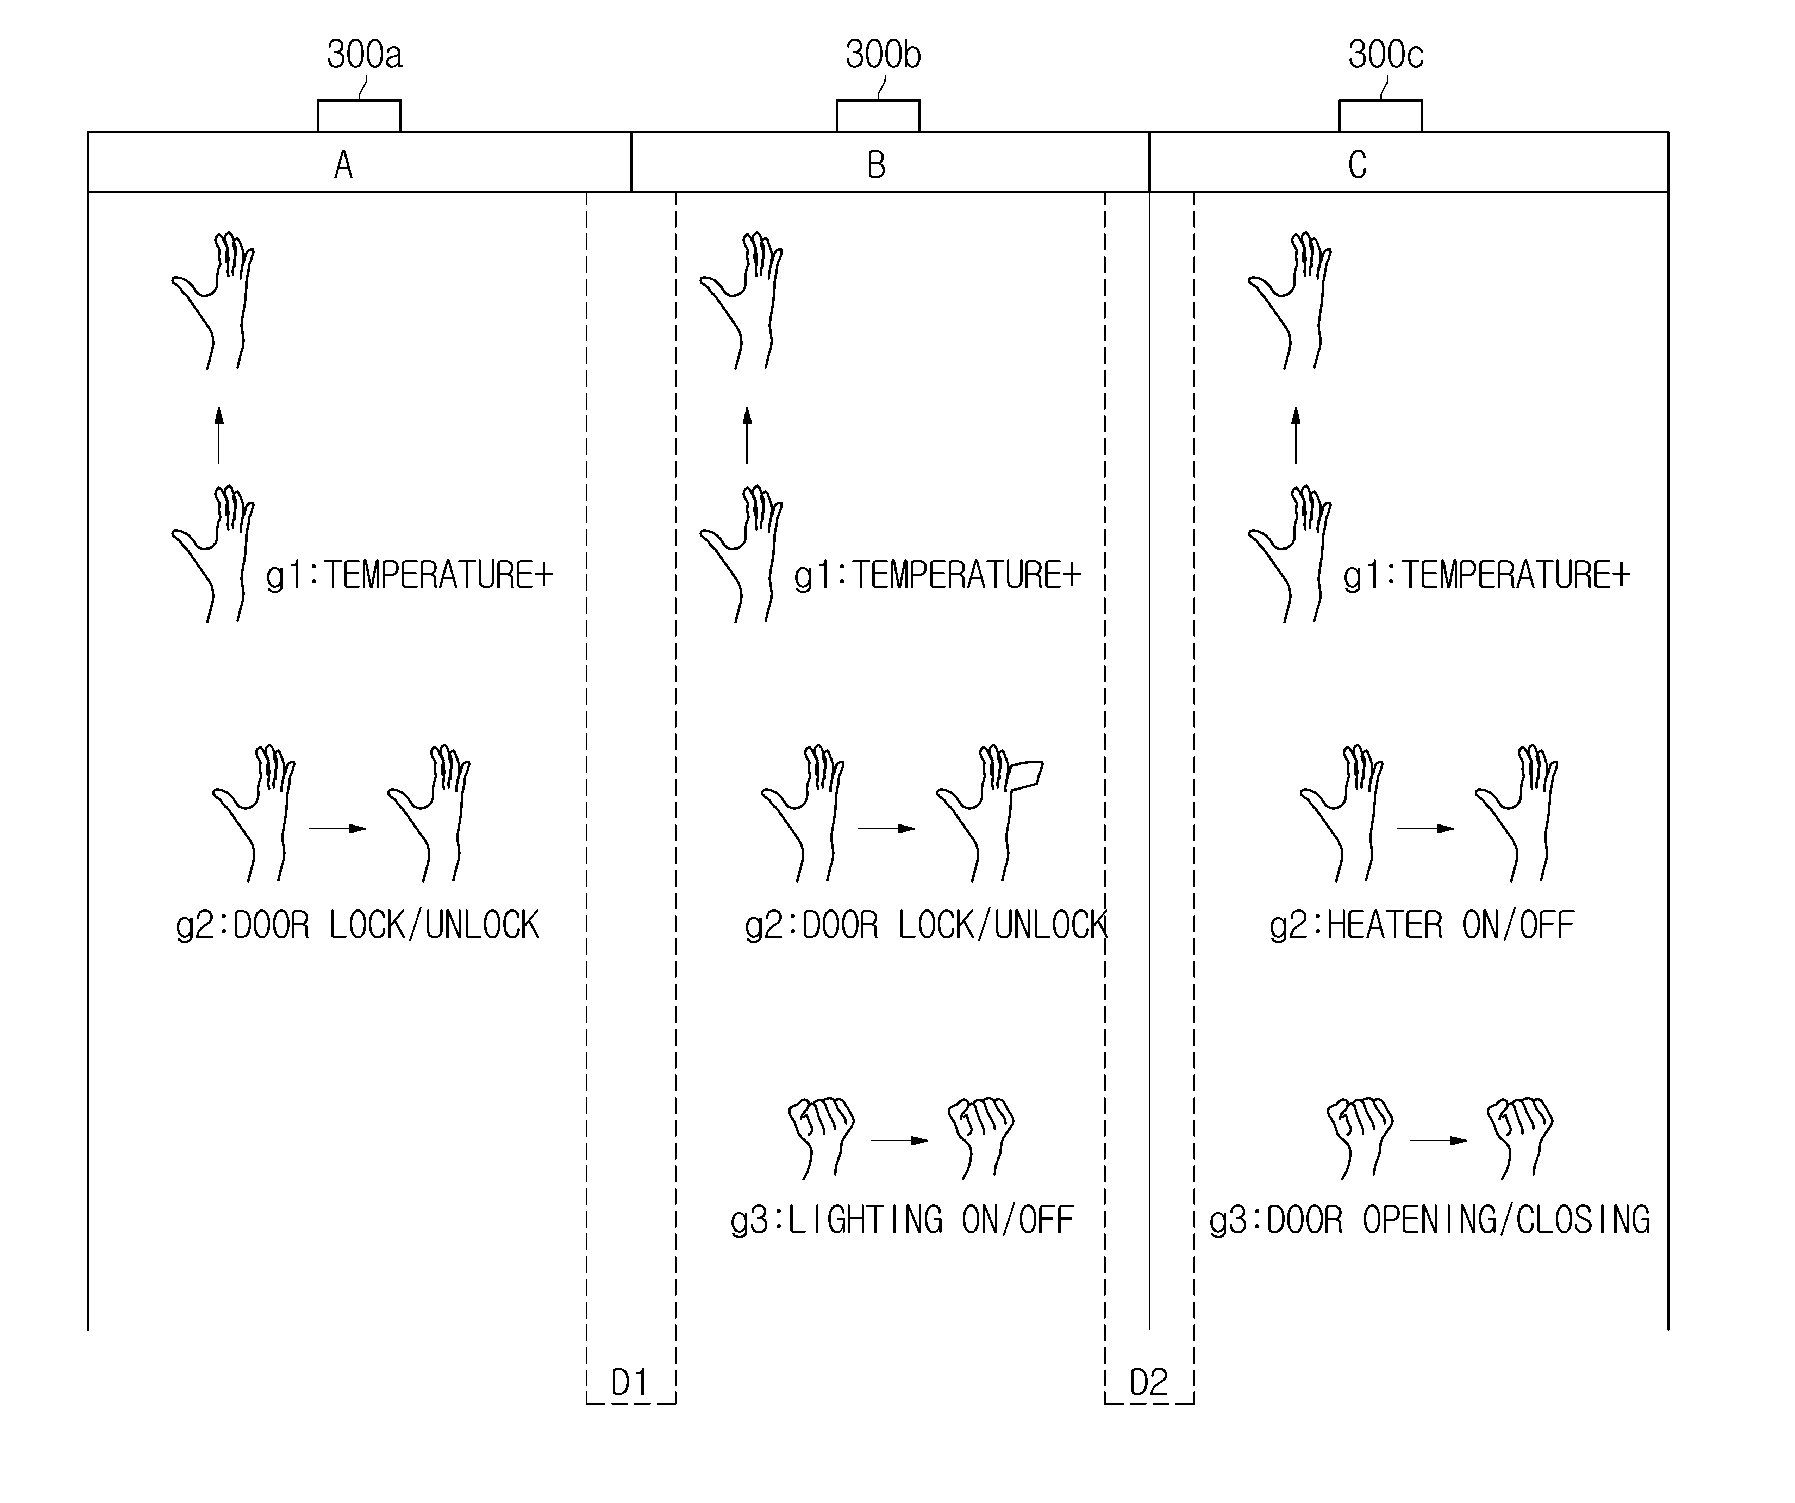 Human machine interface apparatus for vehicle and methods of controlling the same